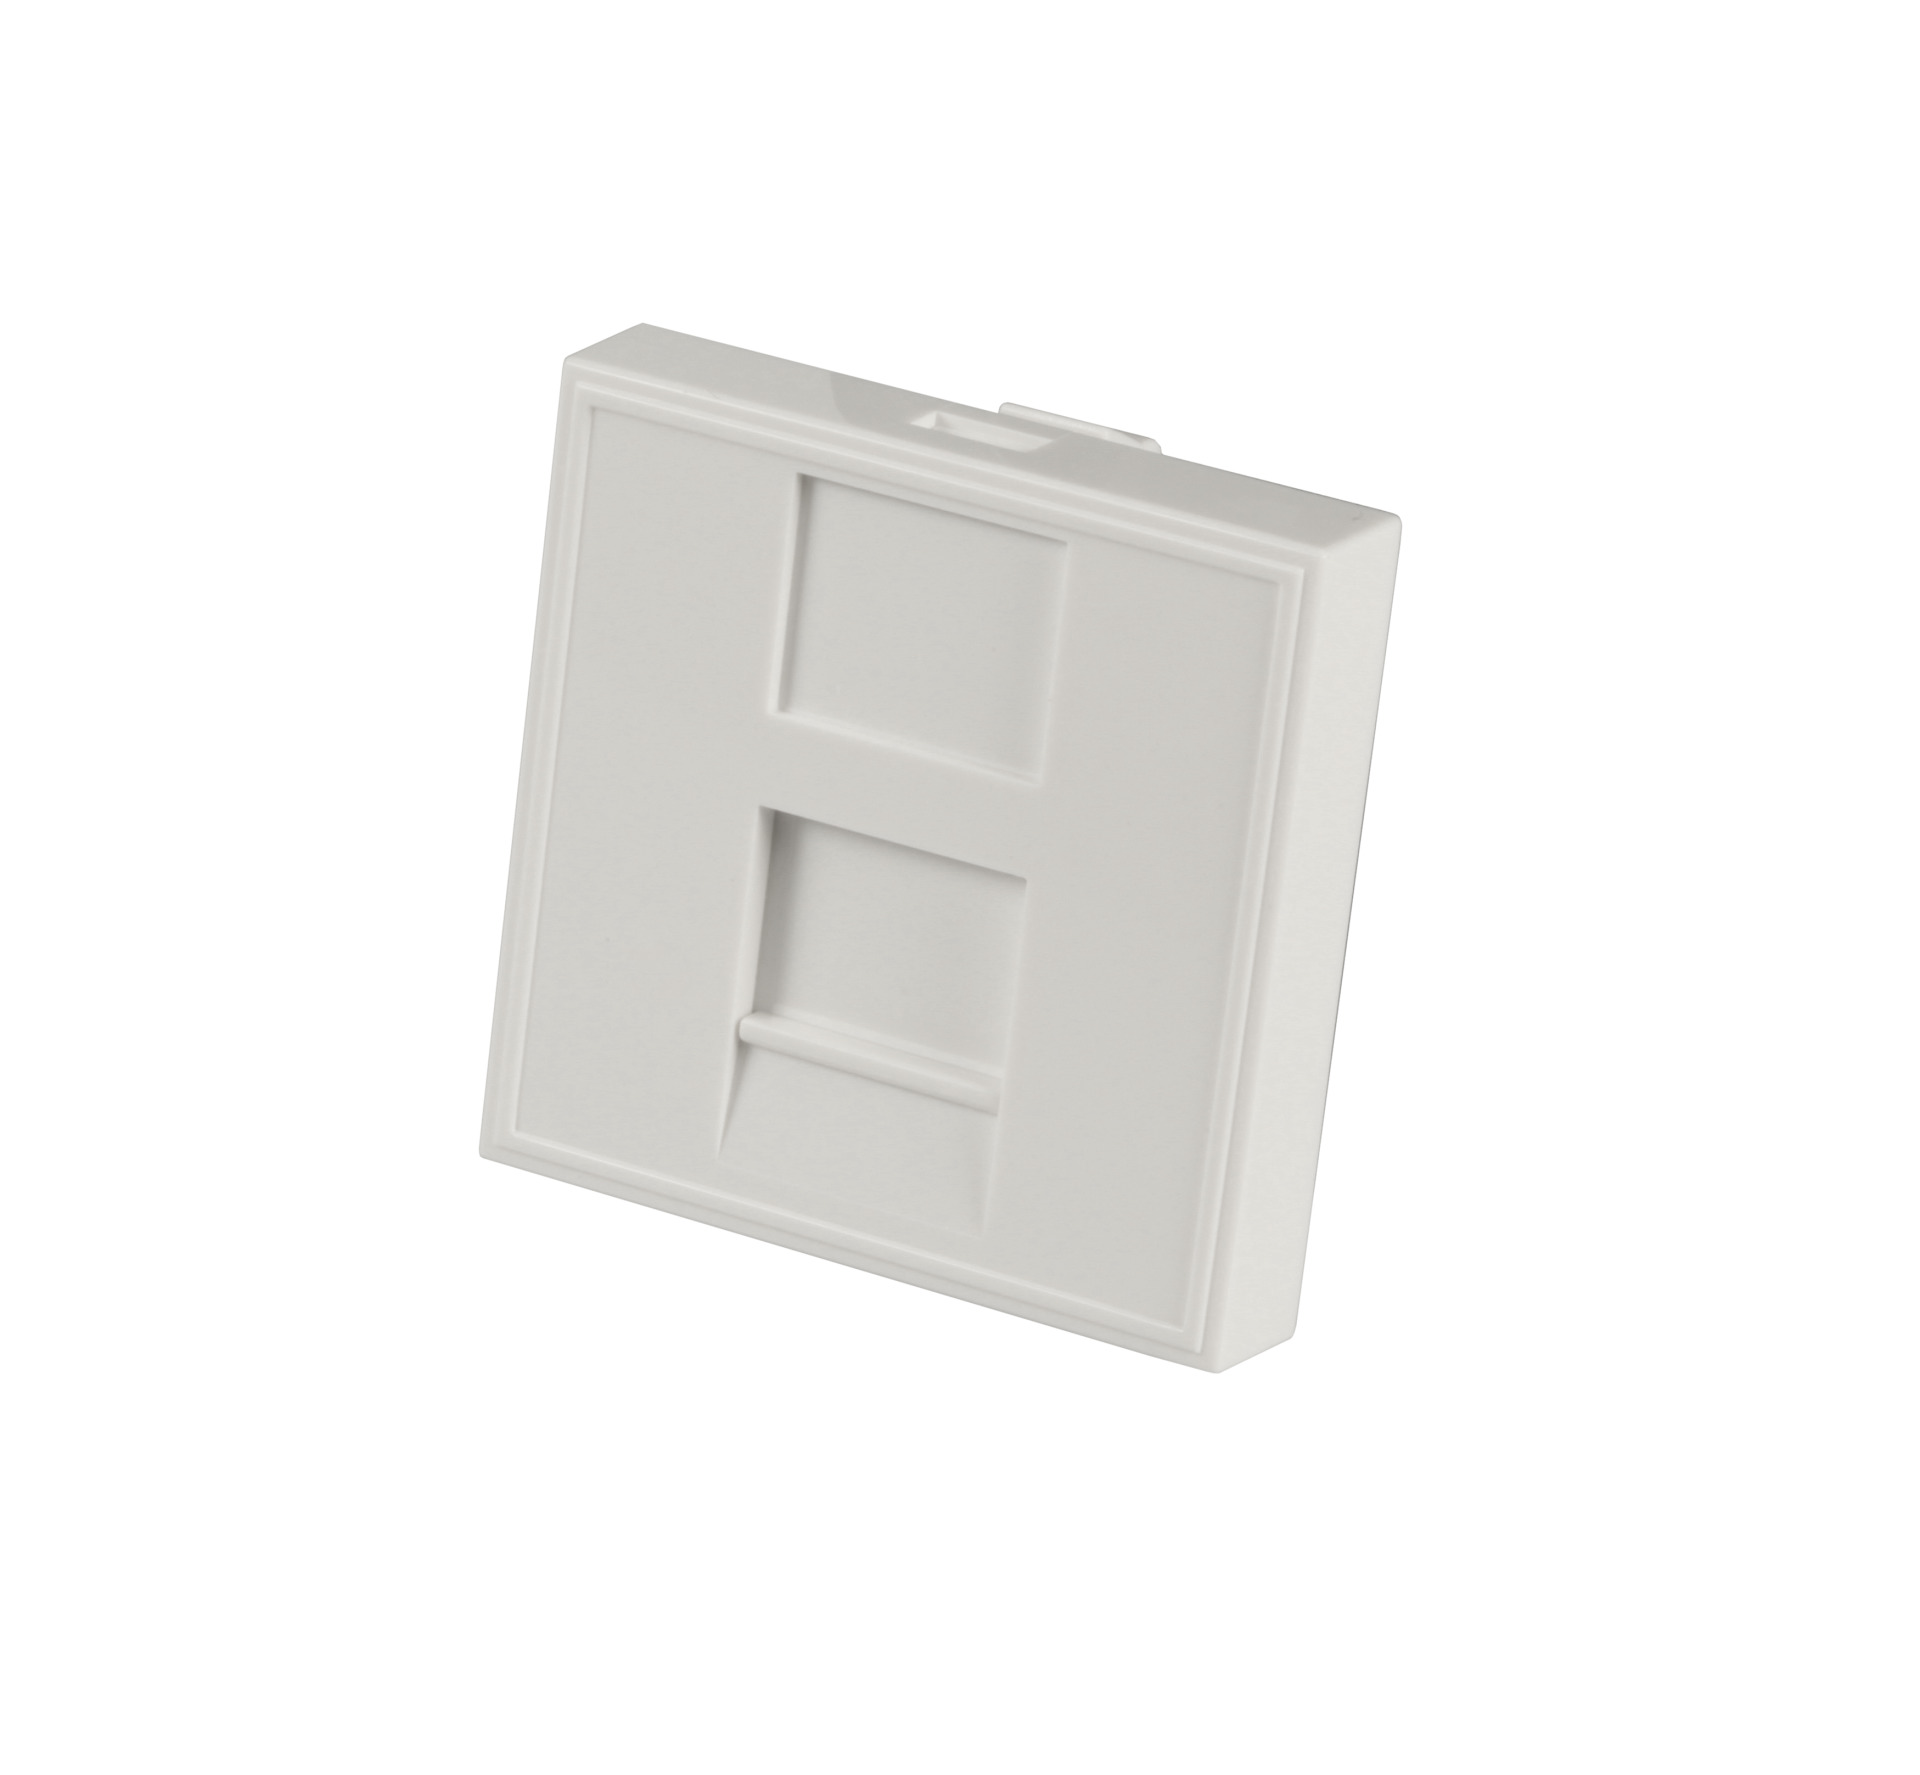 Central plate 45x45mm for 1 keystone, outlet direct